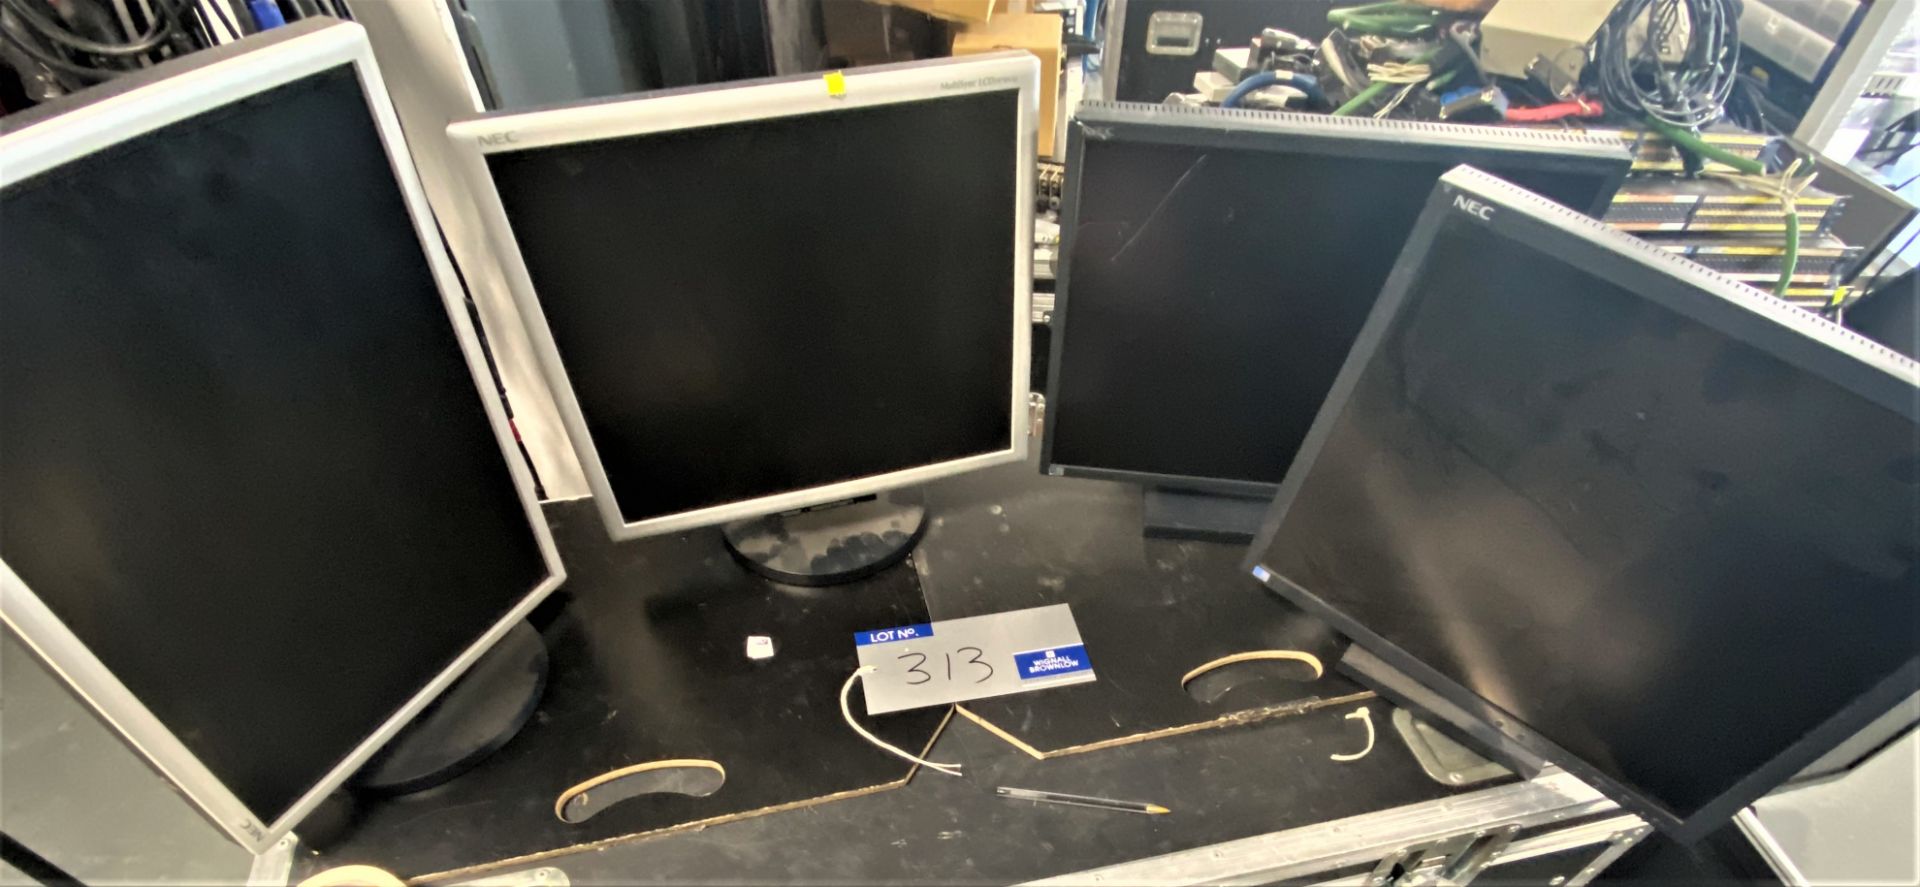 4 NEC Monitors, 2-1970NXP, 2-1980FXI (perviously in use, some screens marked).